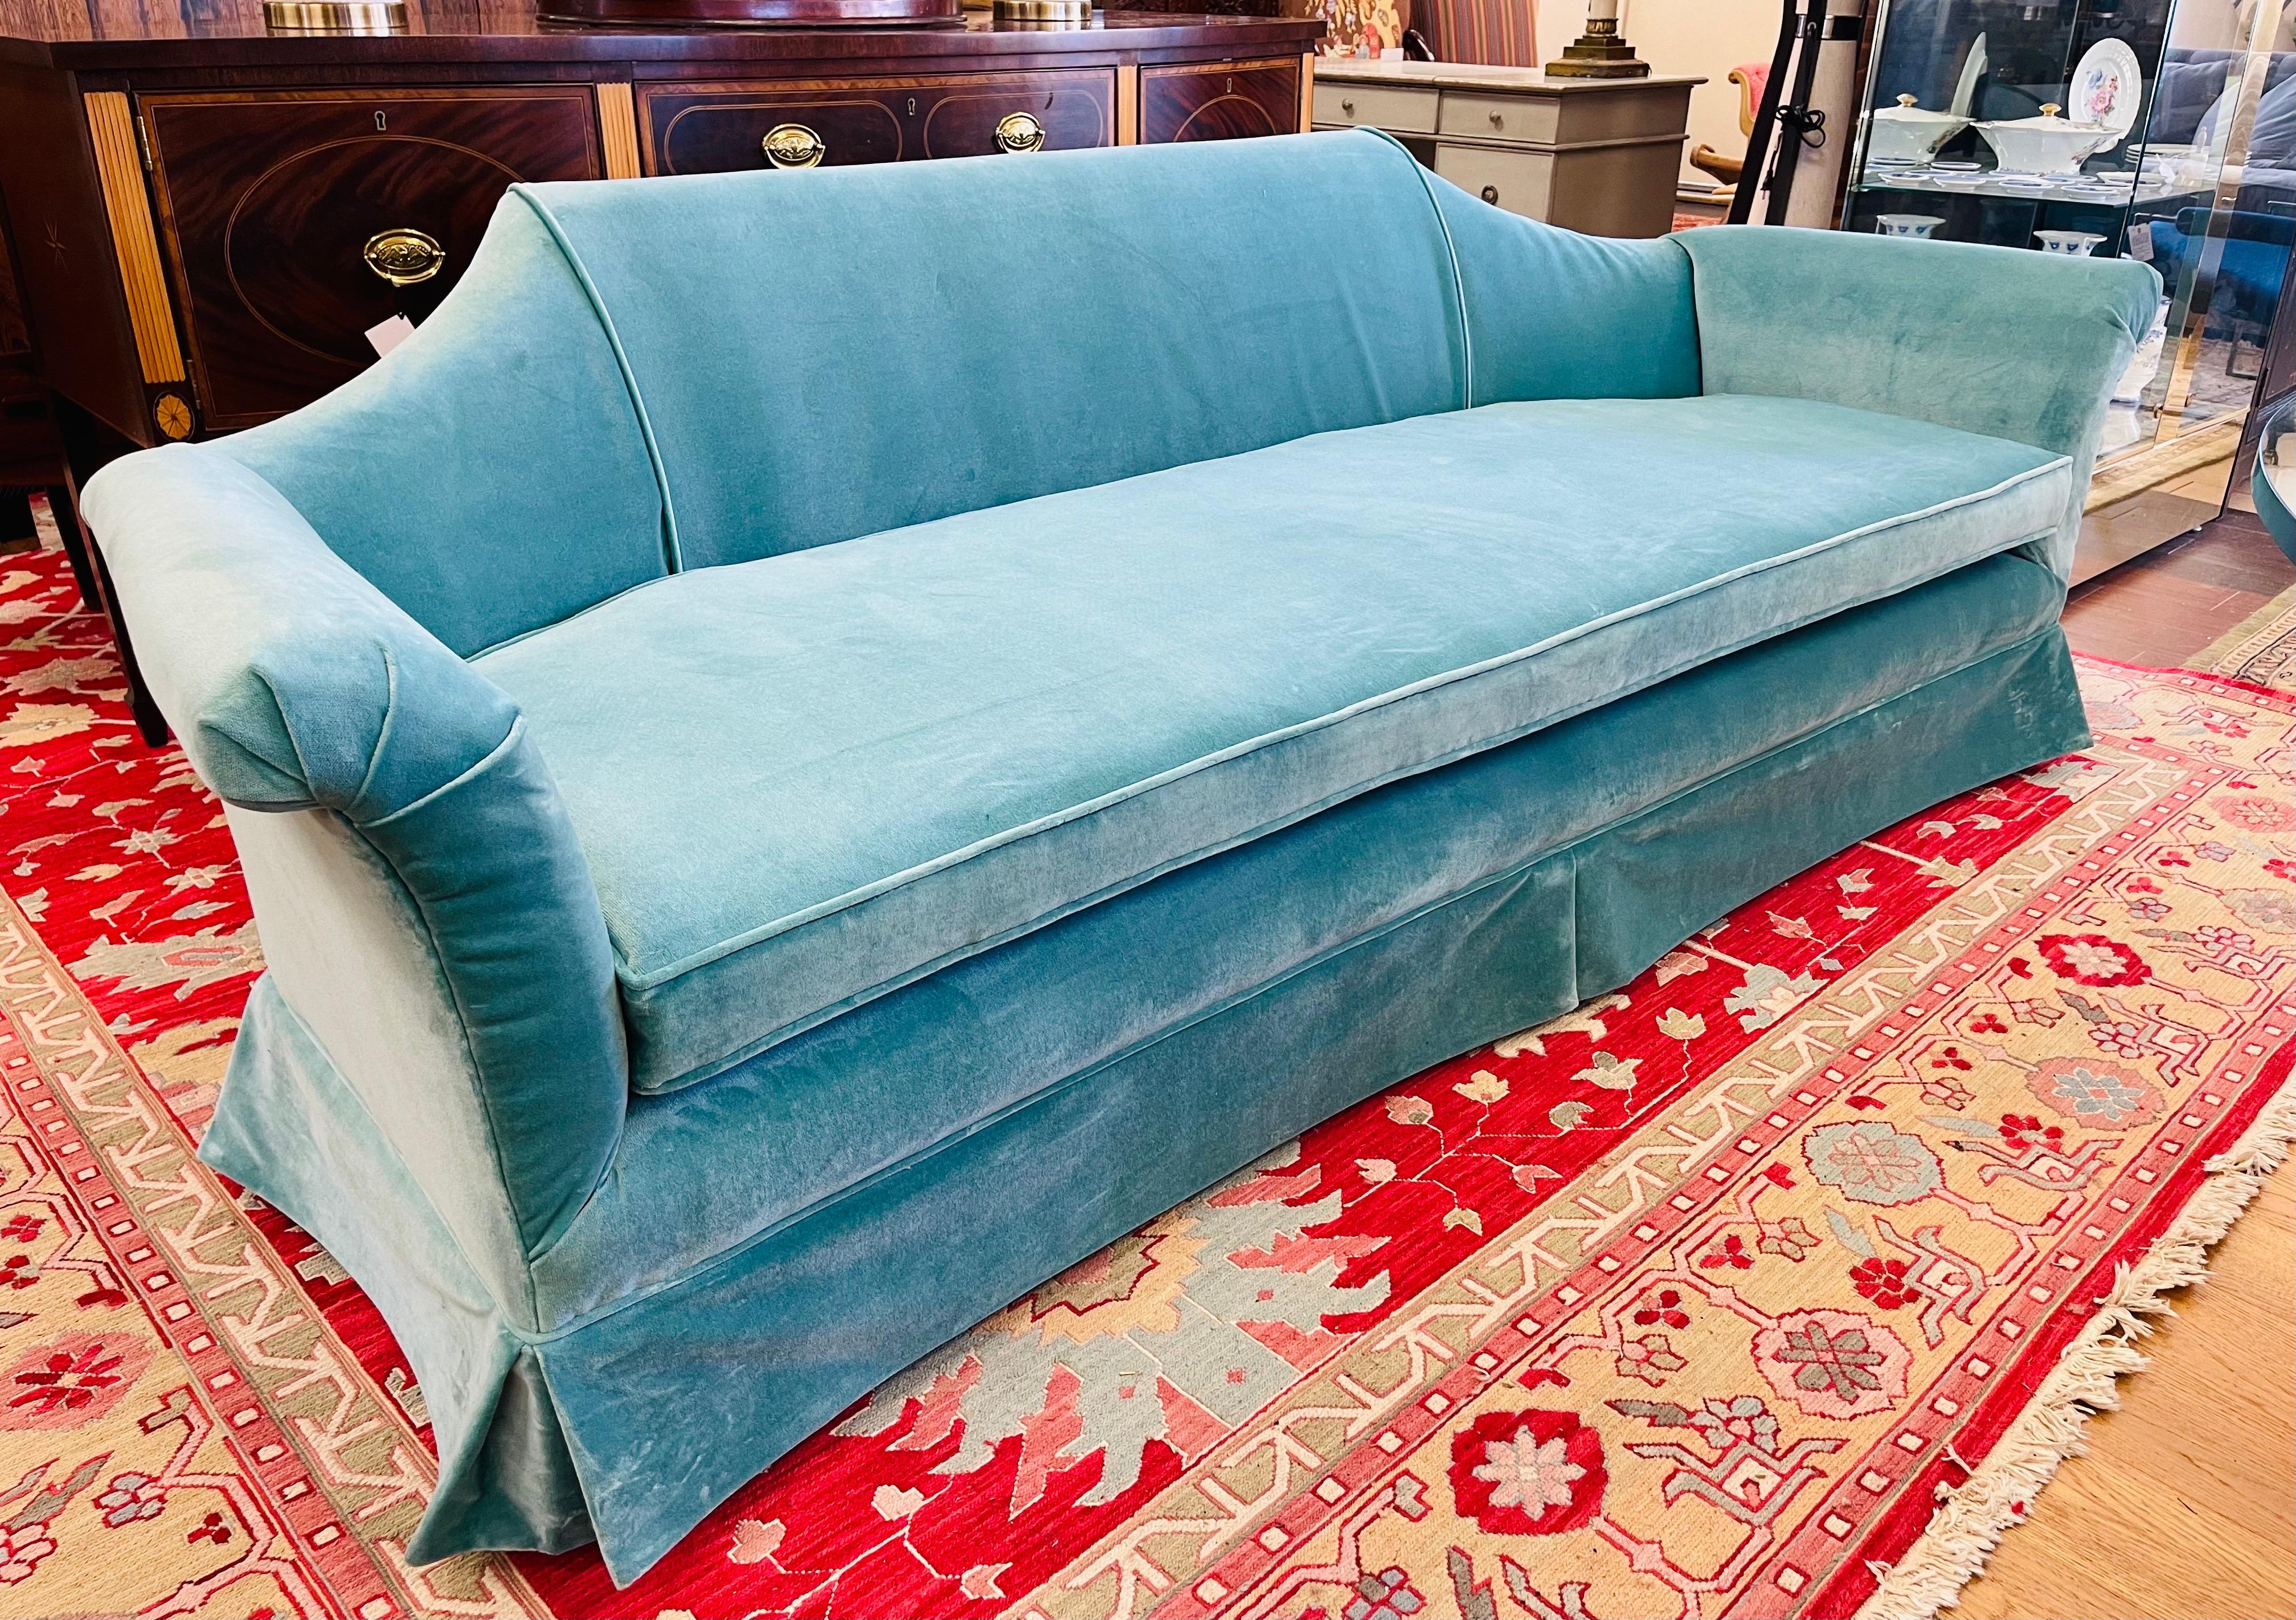 

Elevate your living space with this stunning Hickory Furniture sofa recently reupholstered in a blue green seafoam velvet fabric from Donghia, radiating Mid-Century Modern vibes. The seafoam blue velvet upholstery is soft to the touch and adds a